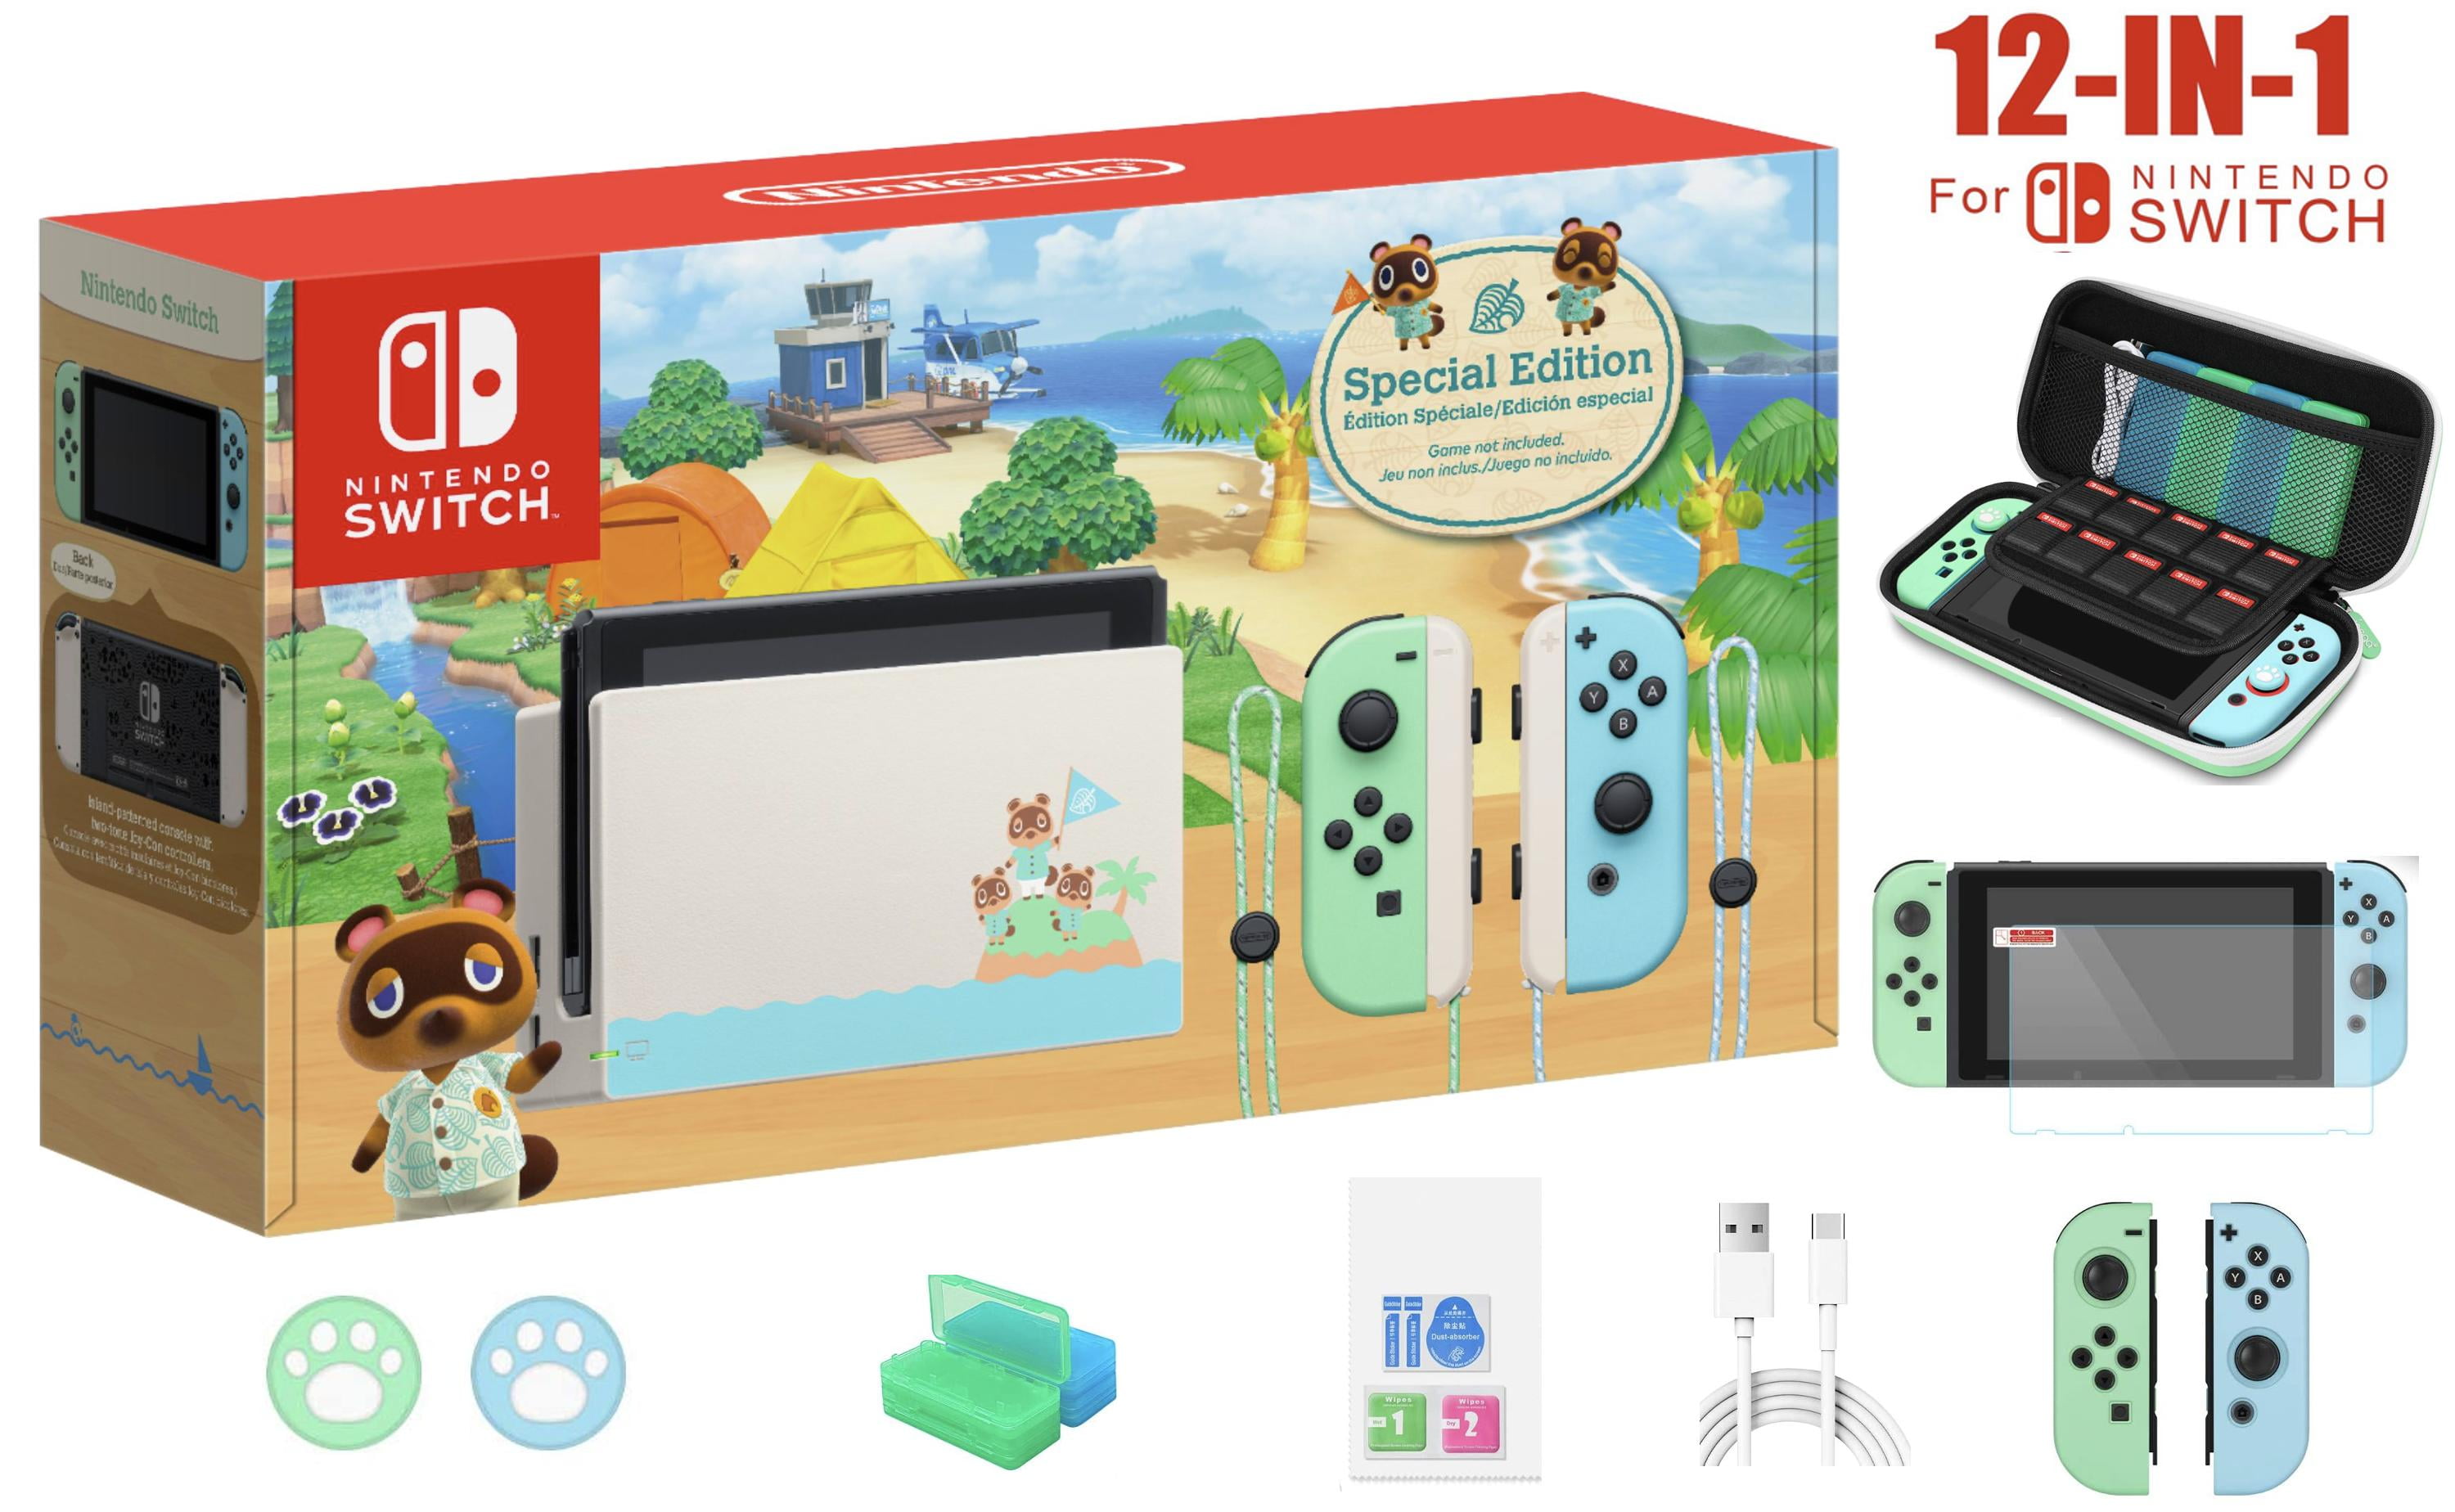 2022 Newest Nintendo Switch Animal Crossing: New Horizons Edition Console - Pastel Green Blue Joy-Con - 6.2" Touchscreen Display, WiFi, + 12-in-1 Marxsol Holiday Bundle - Walmart.com